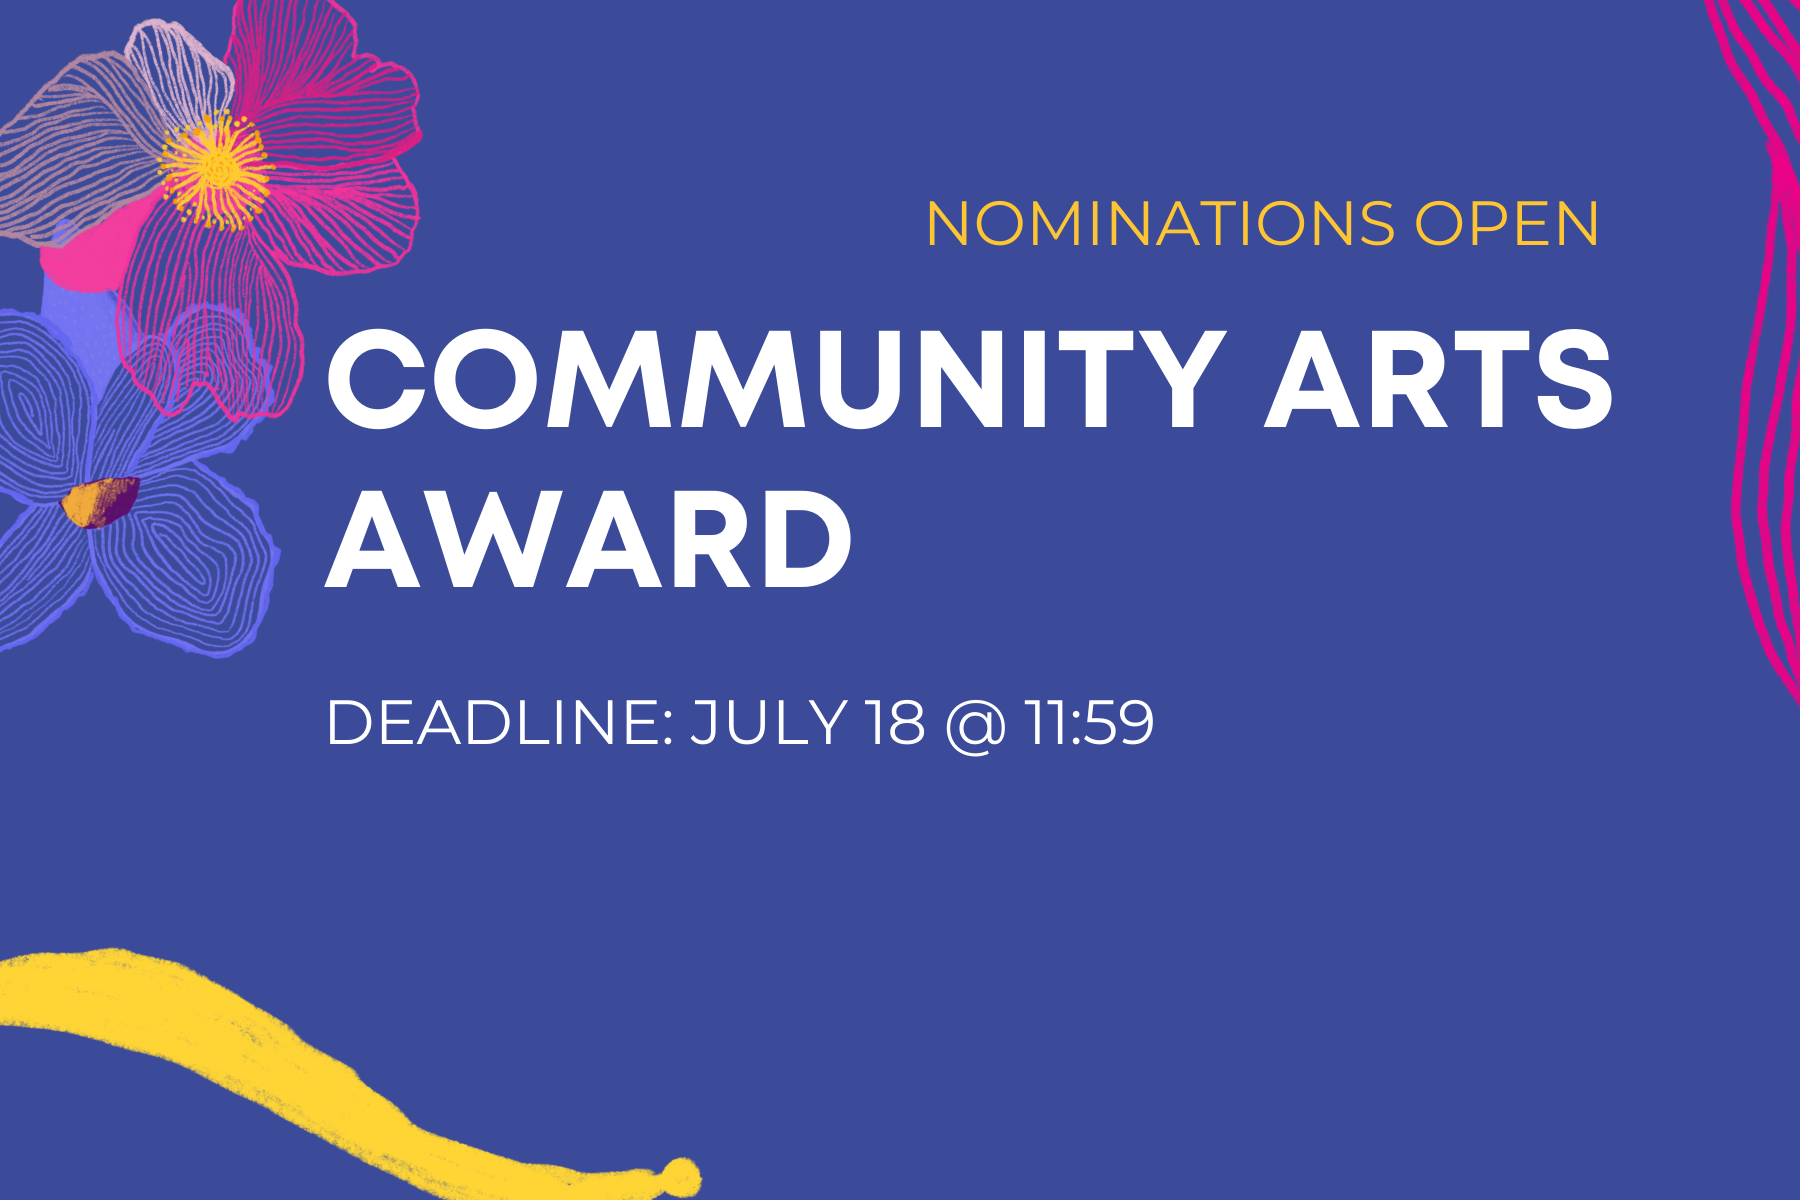 Text reads: Community Arts Award nominations now open. Deadline July 18 at 11:59 pm. Dark purple background with purple and pink flowers on the top left hand corner. Yellow line tracing the bottom 